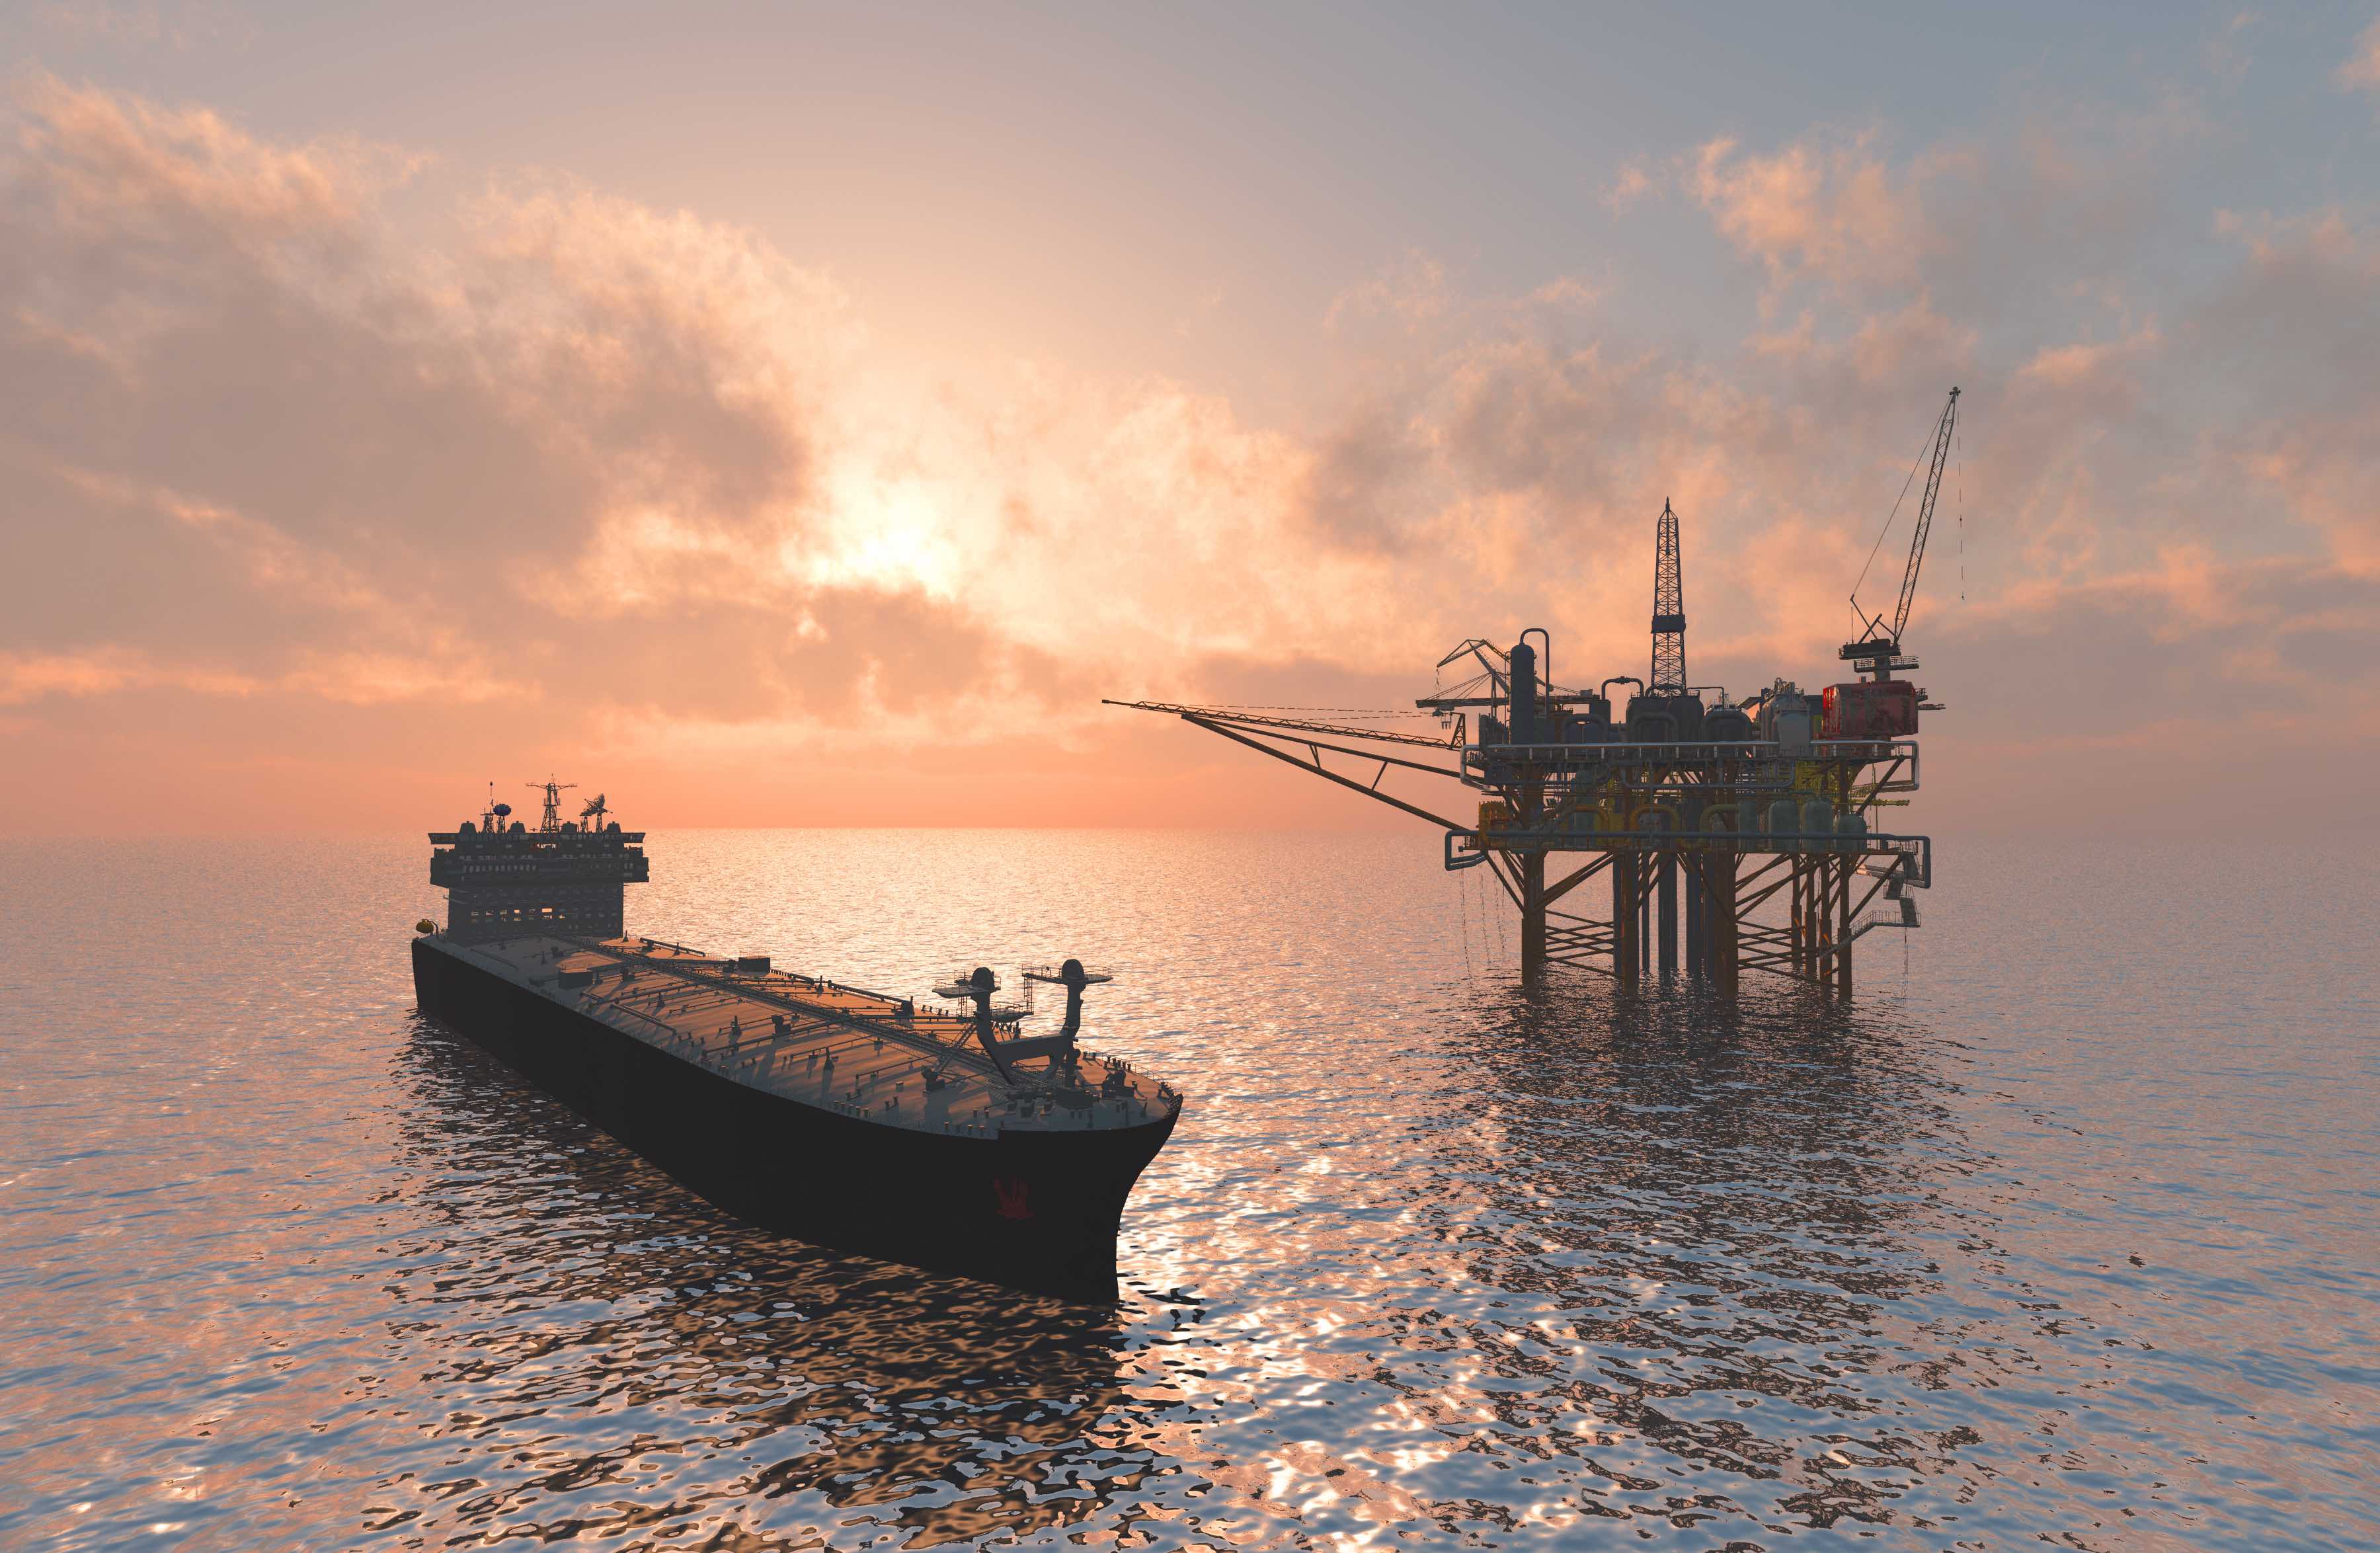 PGNiG launches production from a new field in the Norwegian Sea - MarinePoland.com